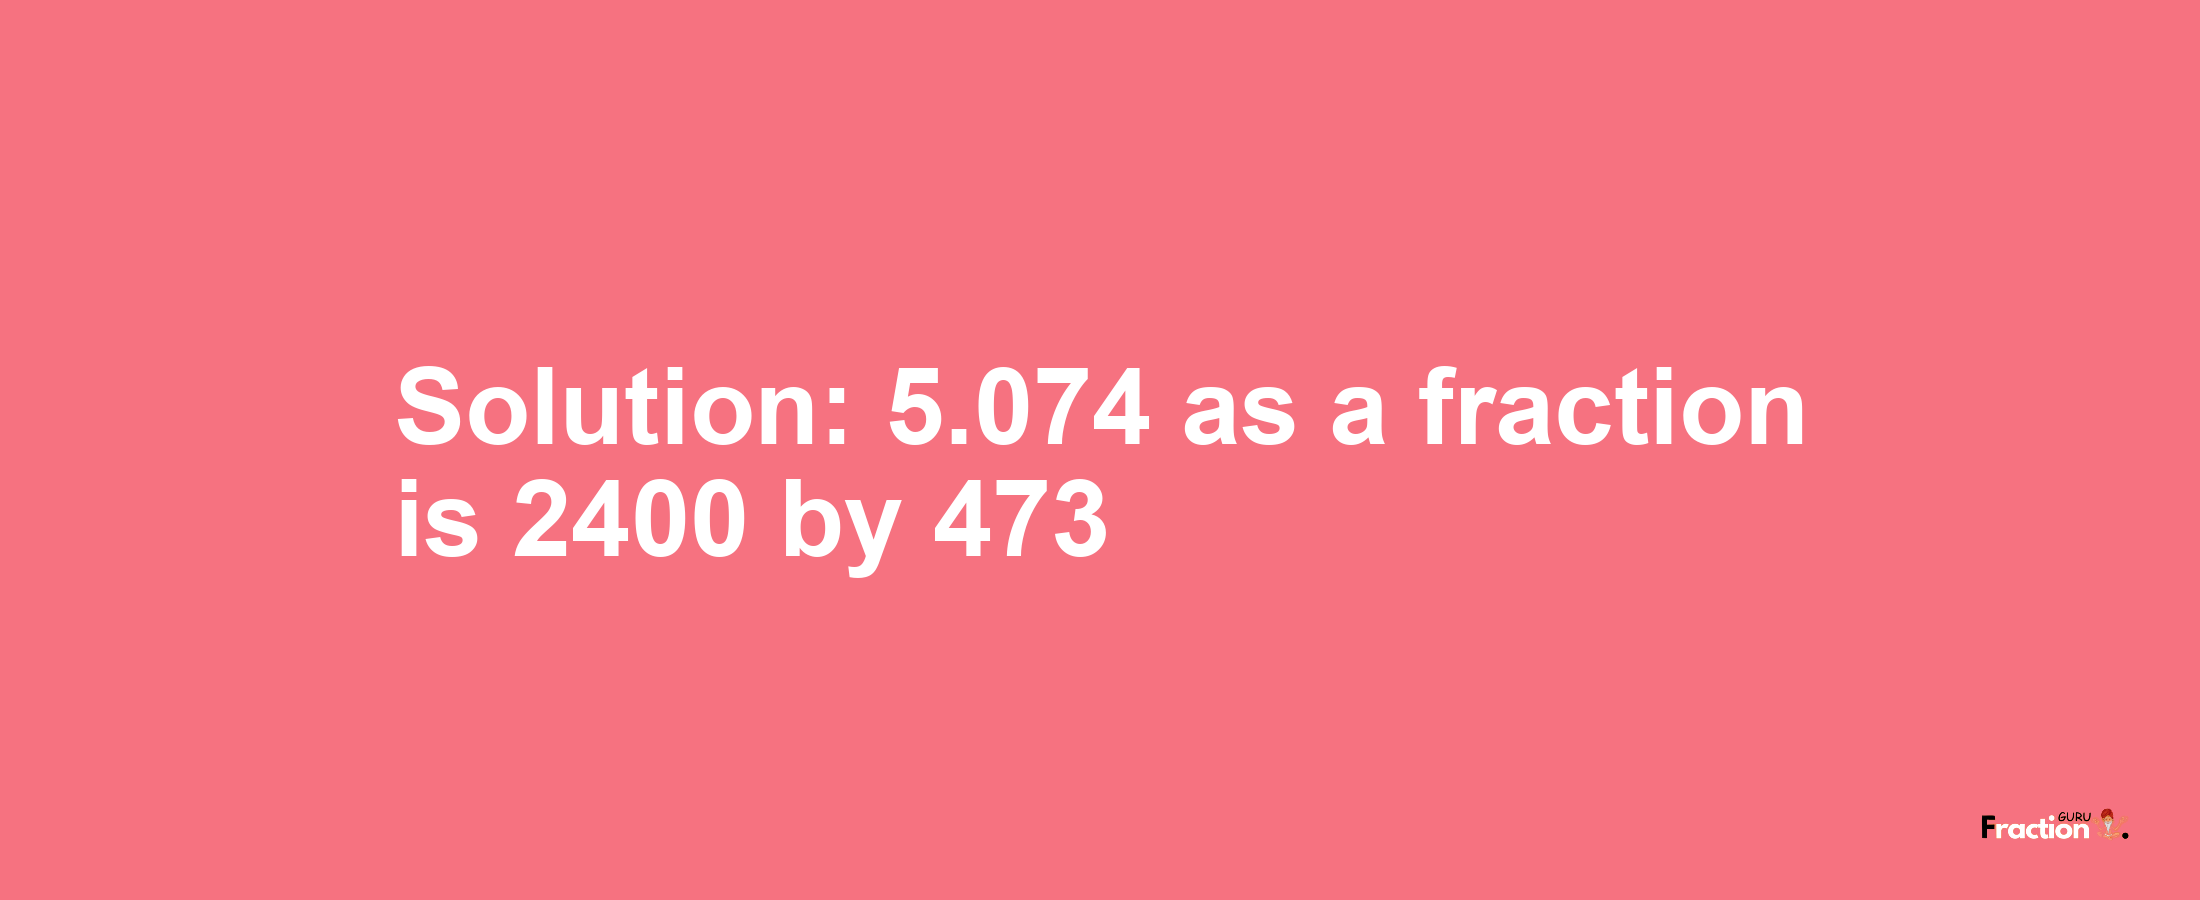 Solution:5.074 as a fraction is 2400/473